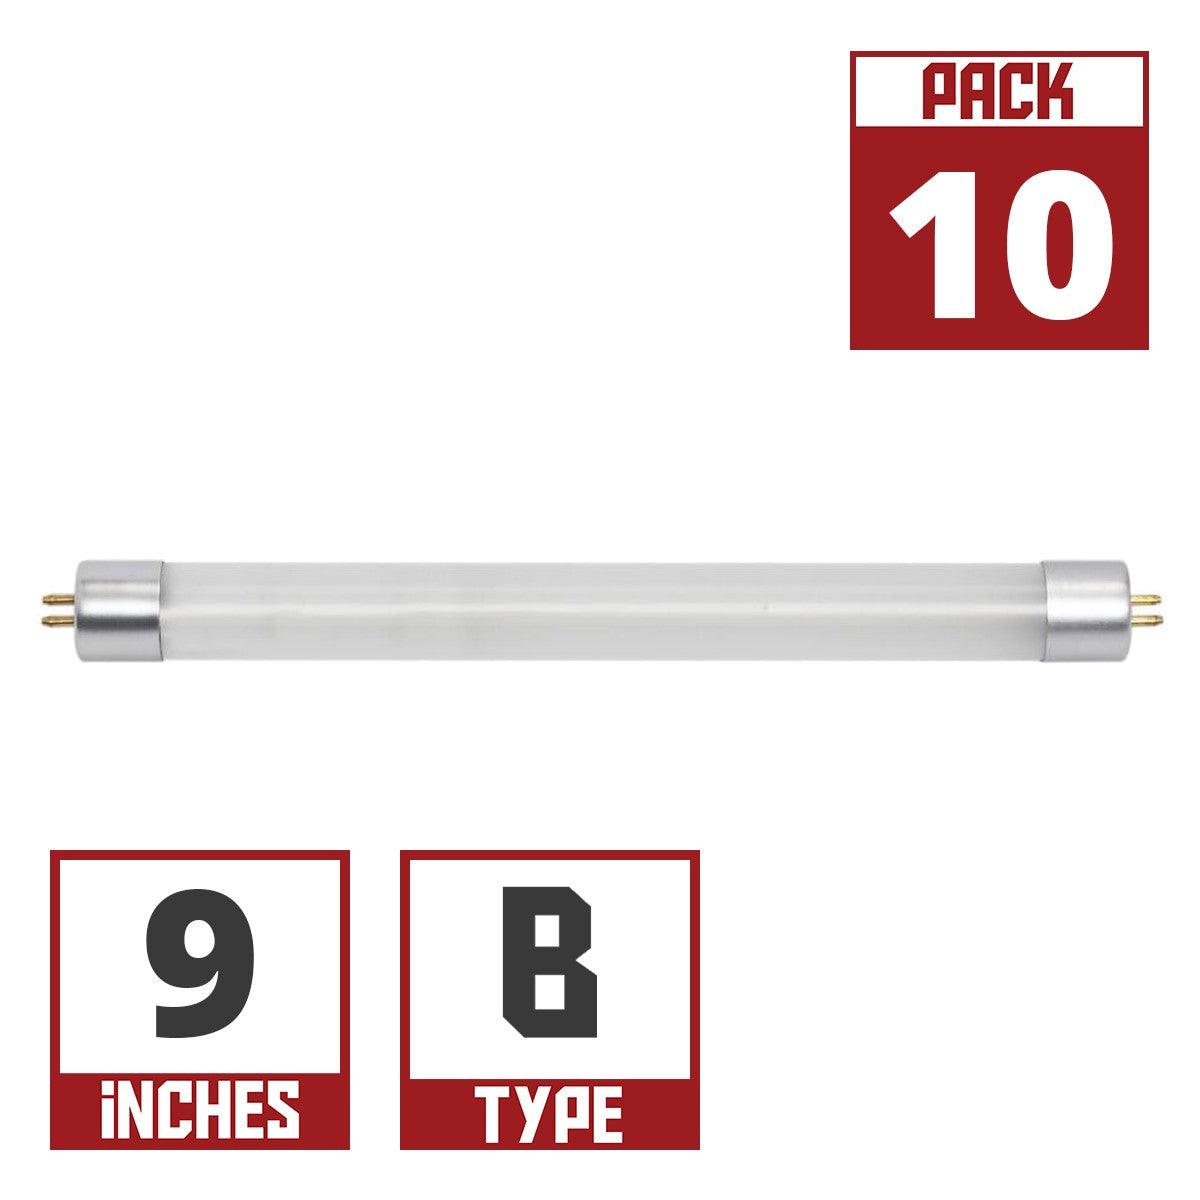 9 Inch LED mini T5 Tube, 2 Watt, 270 Lumens, 4000K, F6T5 Replacement, Ballast Bypass Double End, G5 Base (Case Of 10)